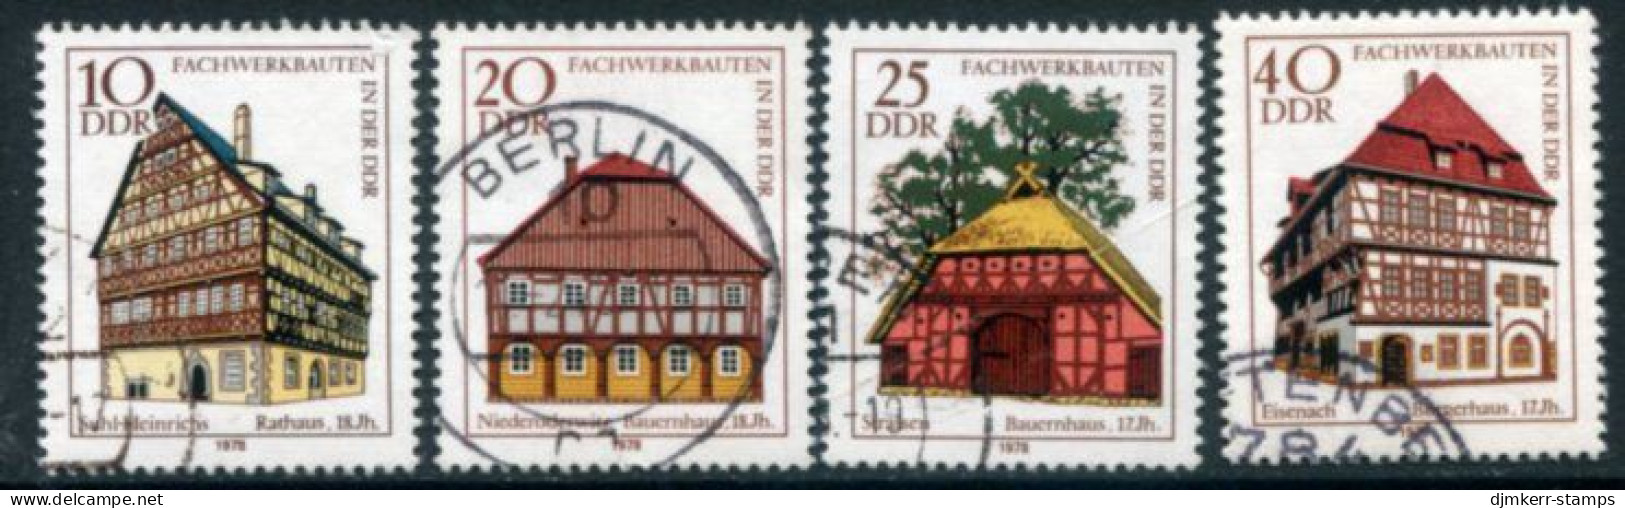 DDR / E. GERMANY 1978 Timber-framed Houses Used.  Michel 2294-98 - Used Stamps